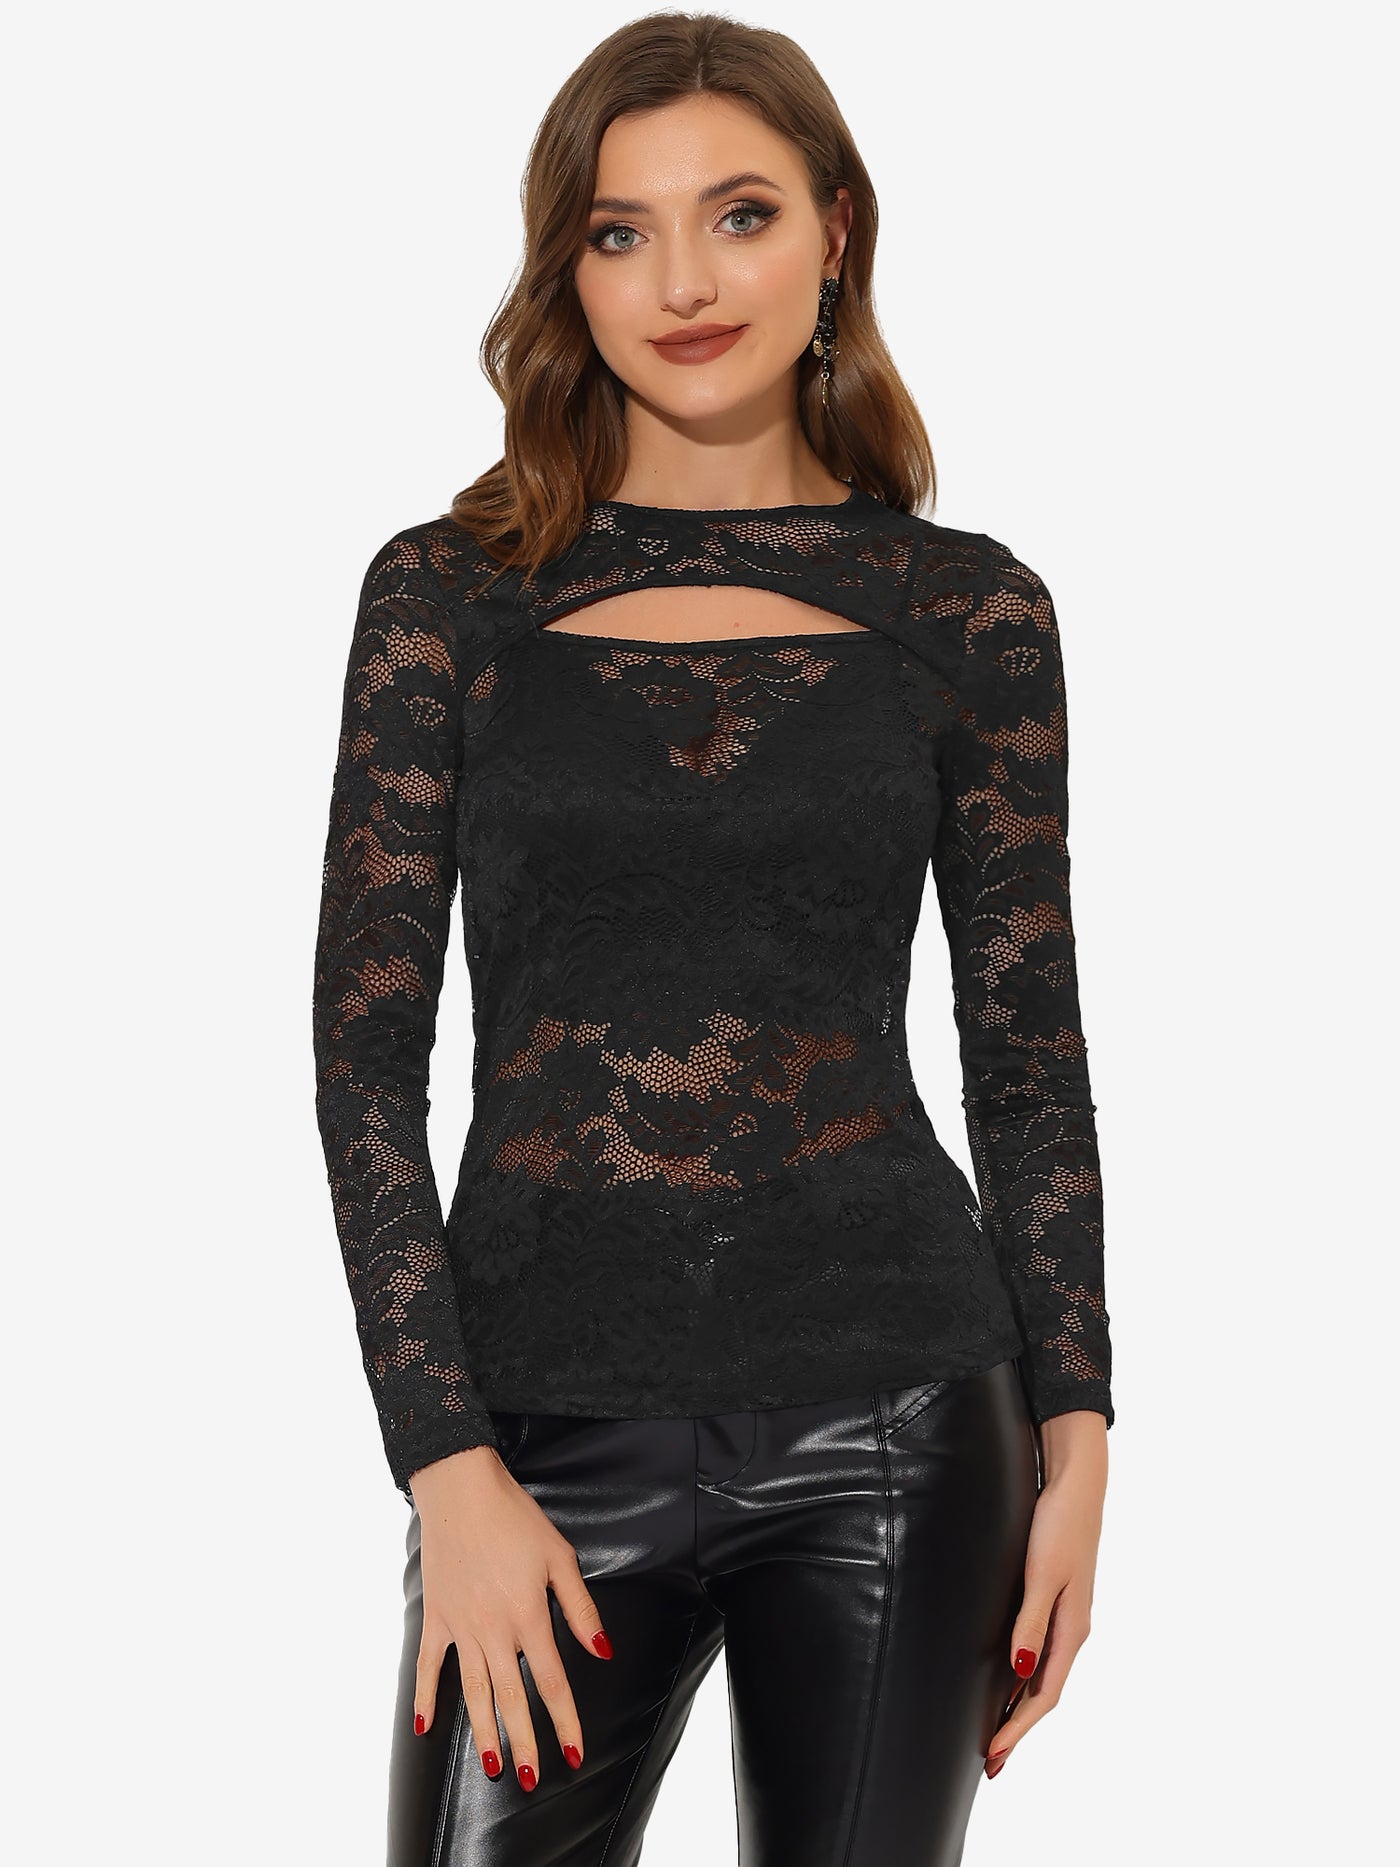 Allegra K See Through Cut Out Long Sleeve Semi Sheer Fitted Lace Top